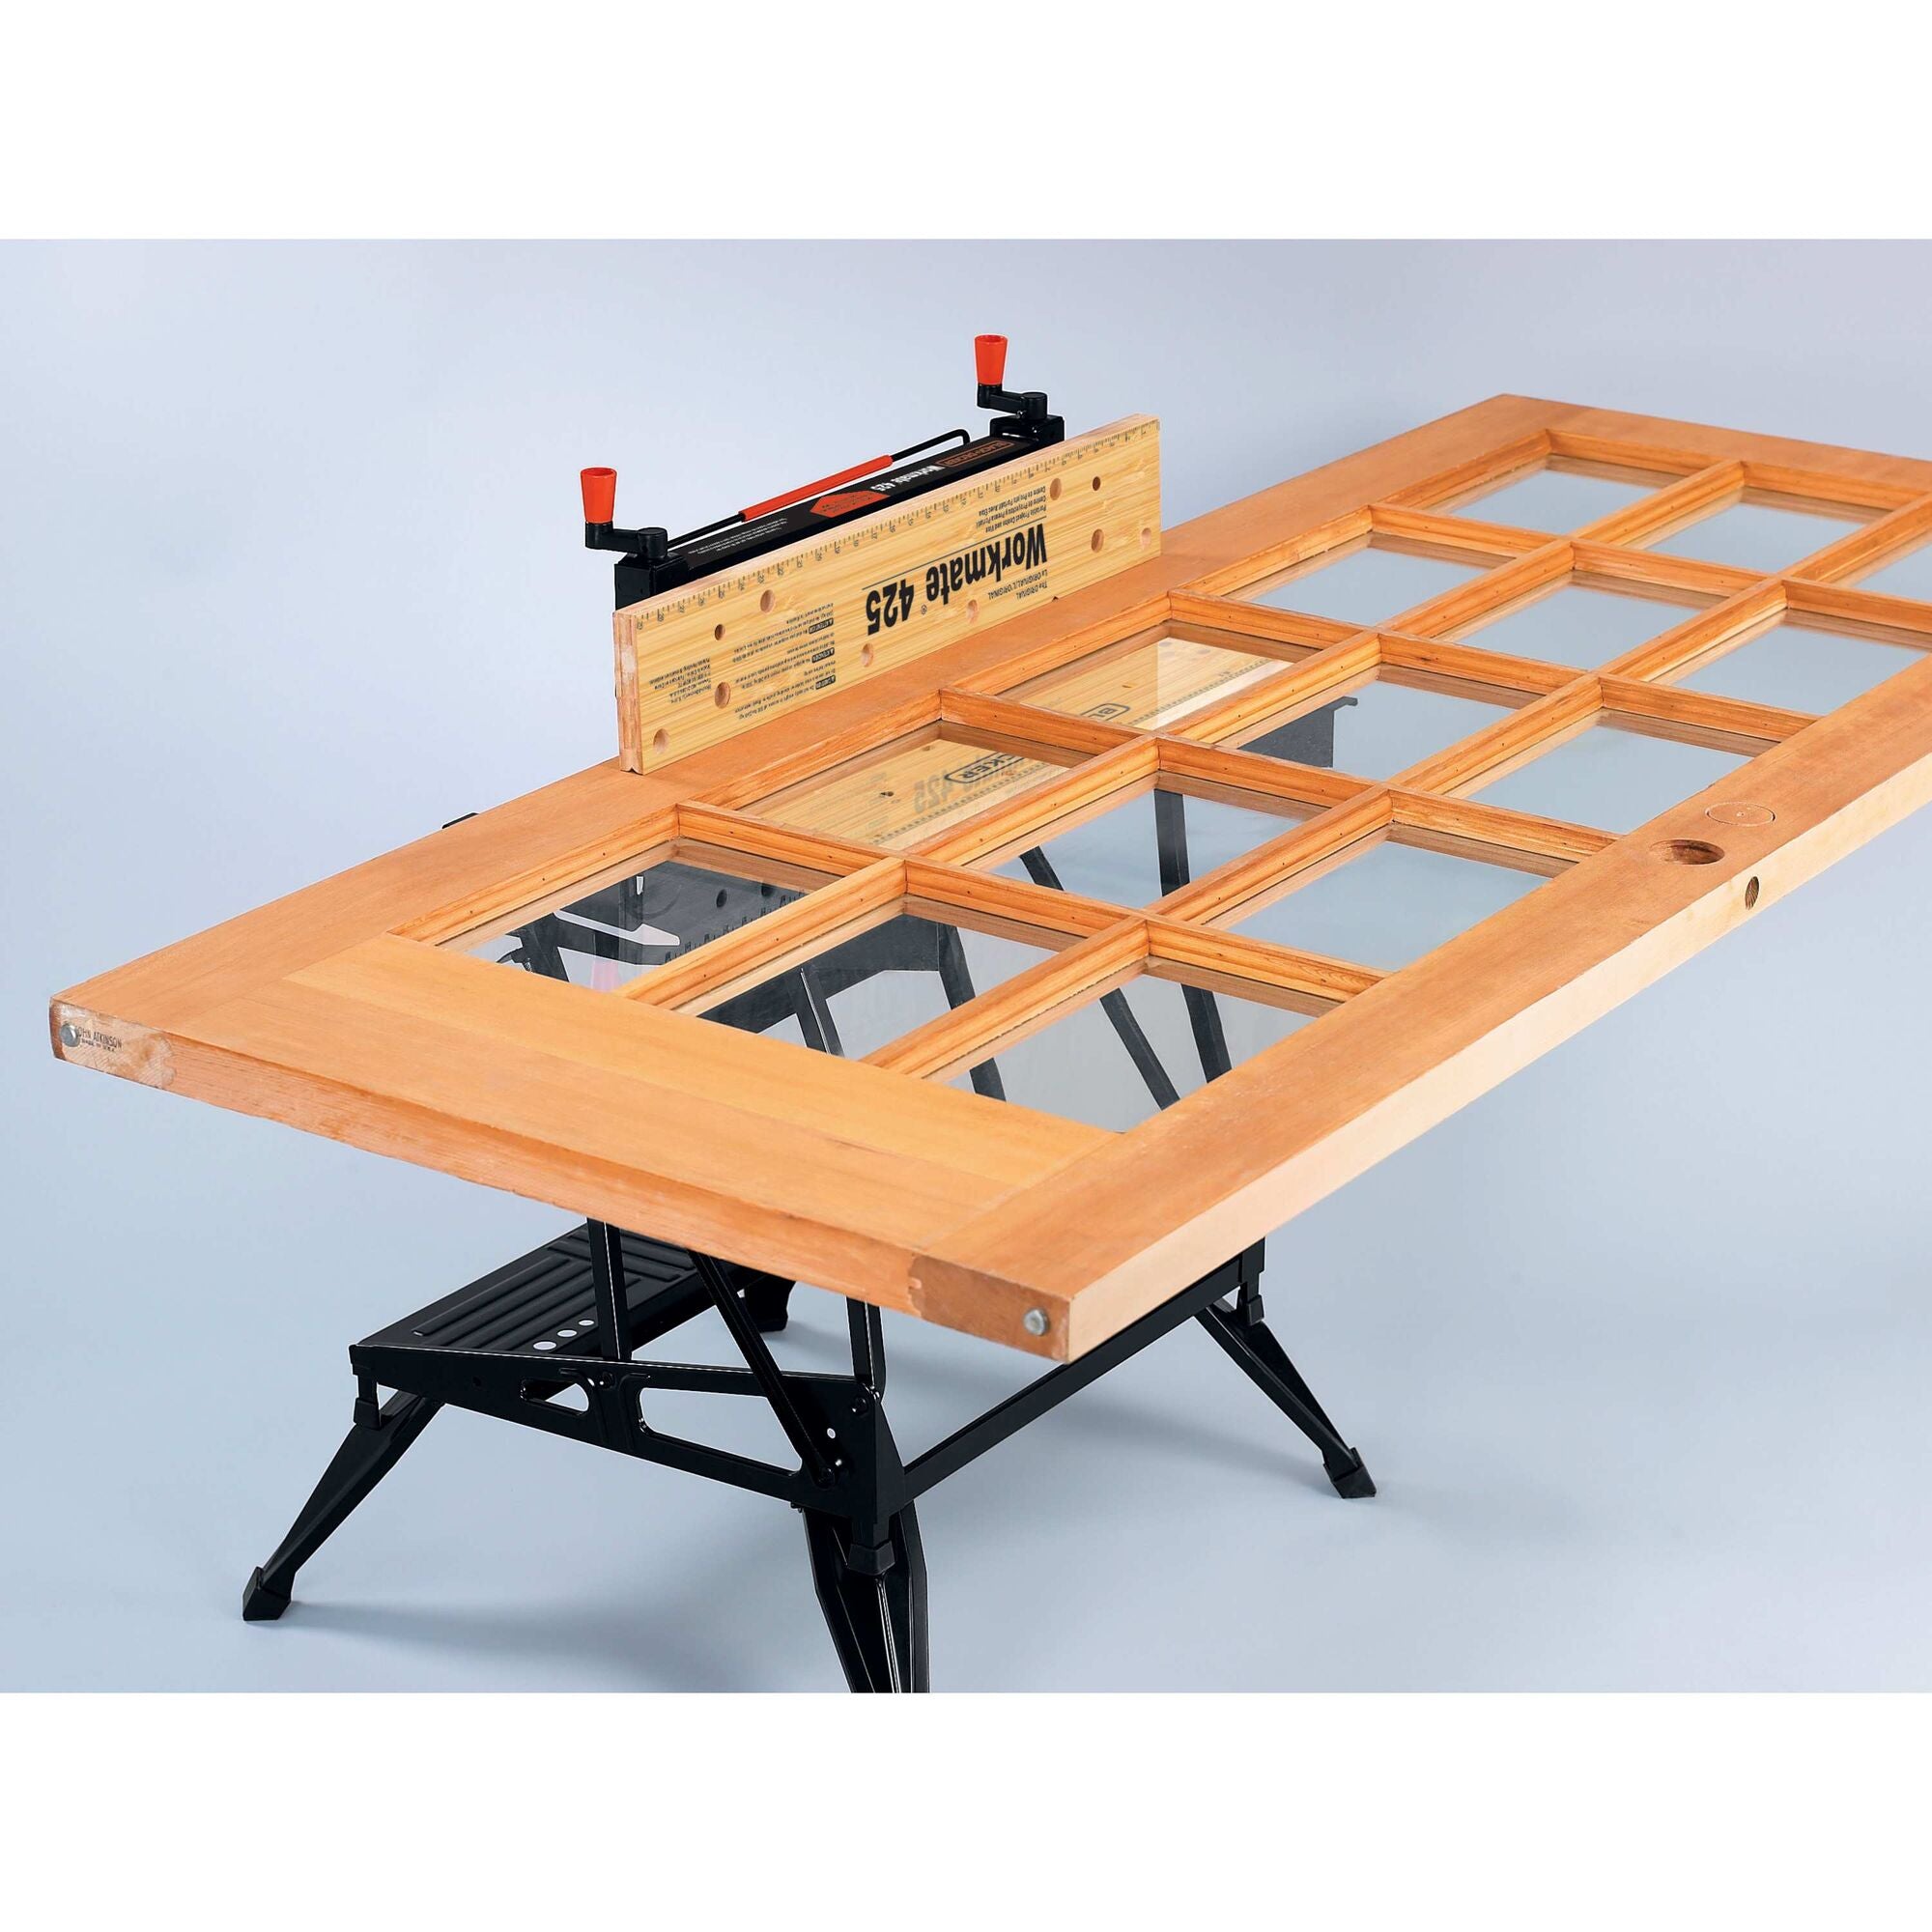 New Pics* Black & Decker Workmate 550 Portable workbench for Sale